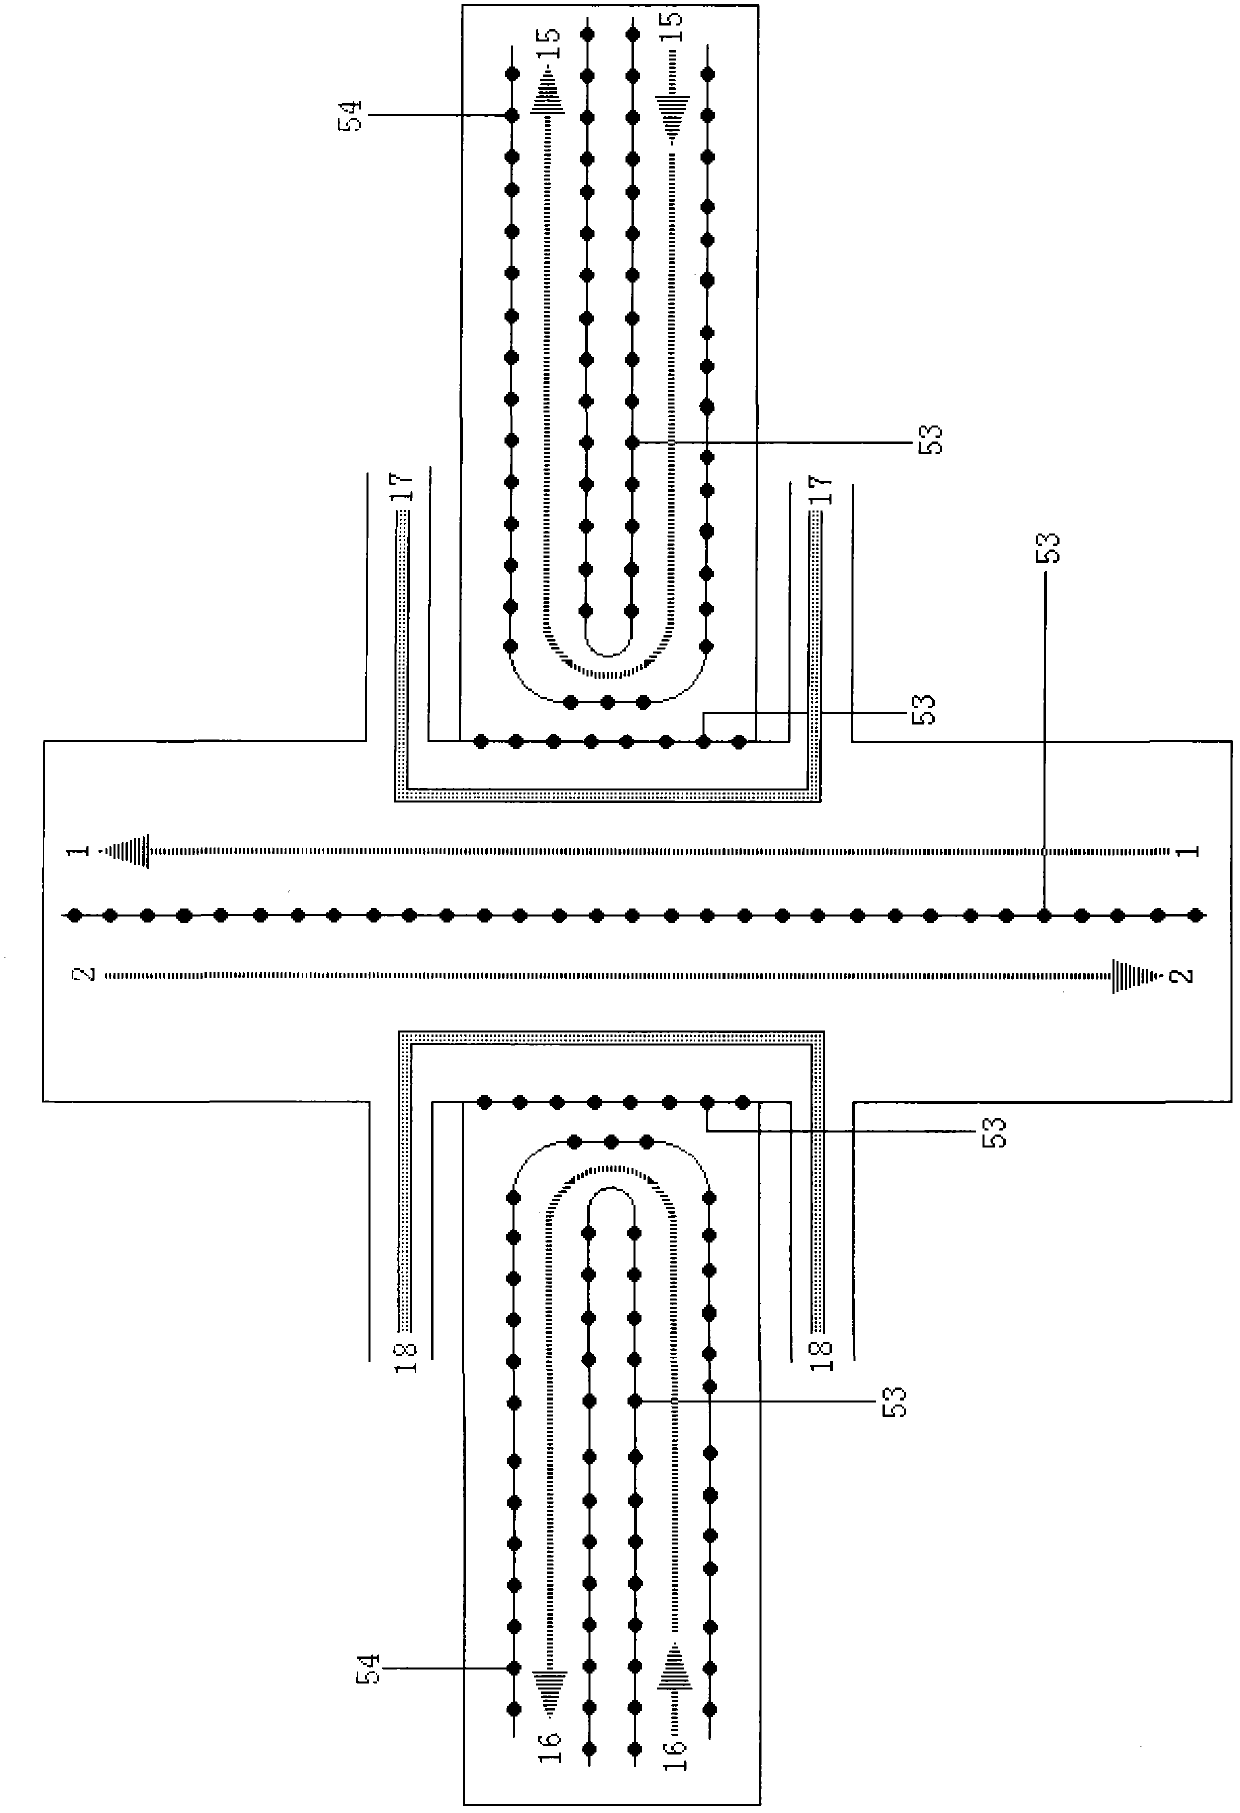 Overpass with structure having three bridge surfaces and four layers